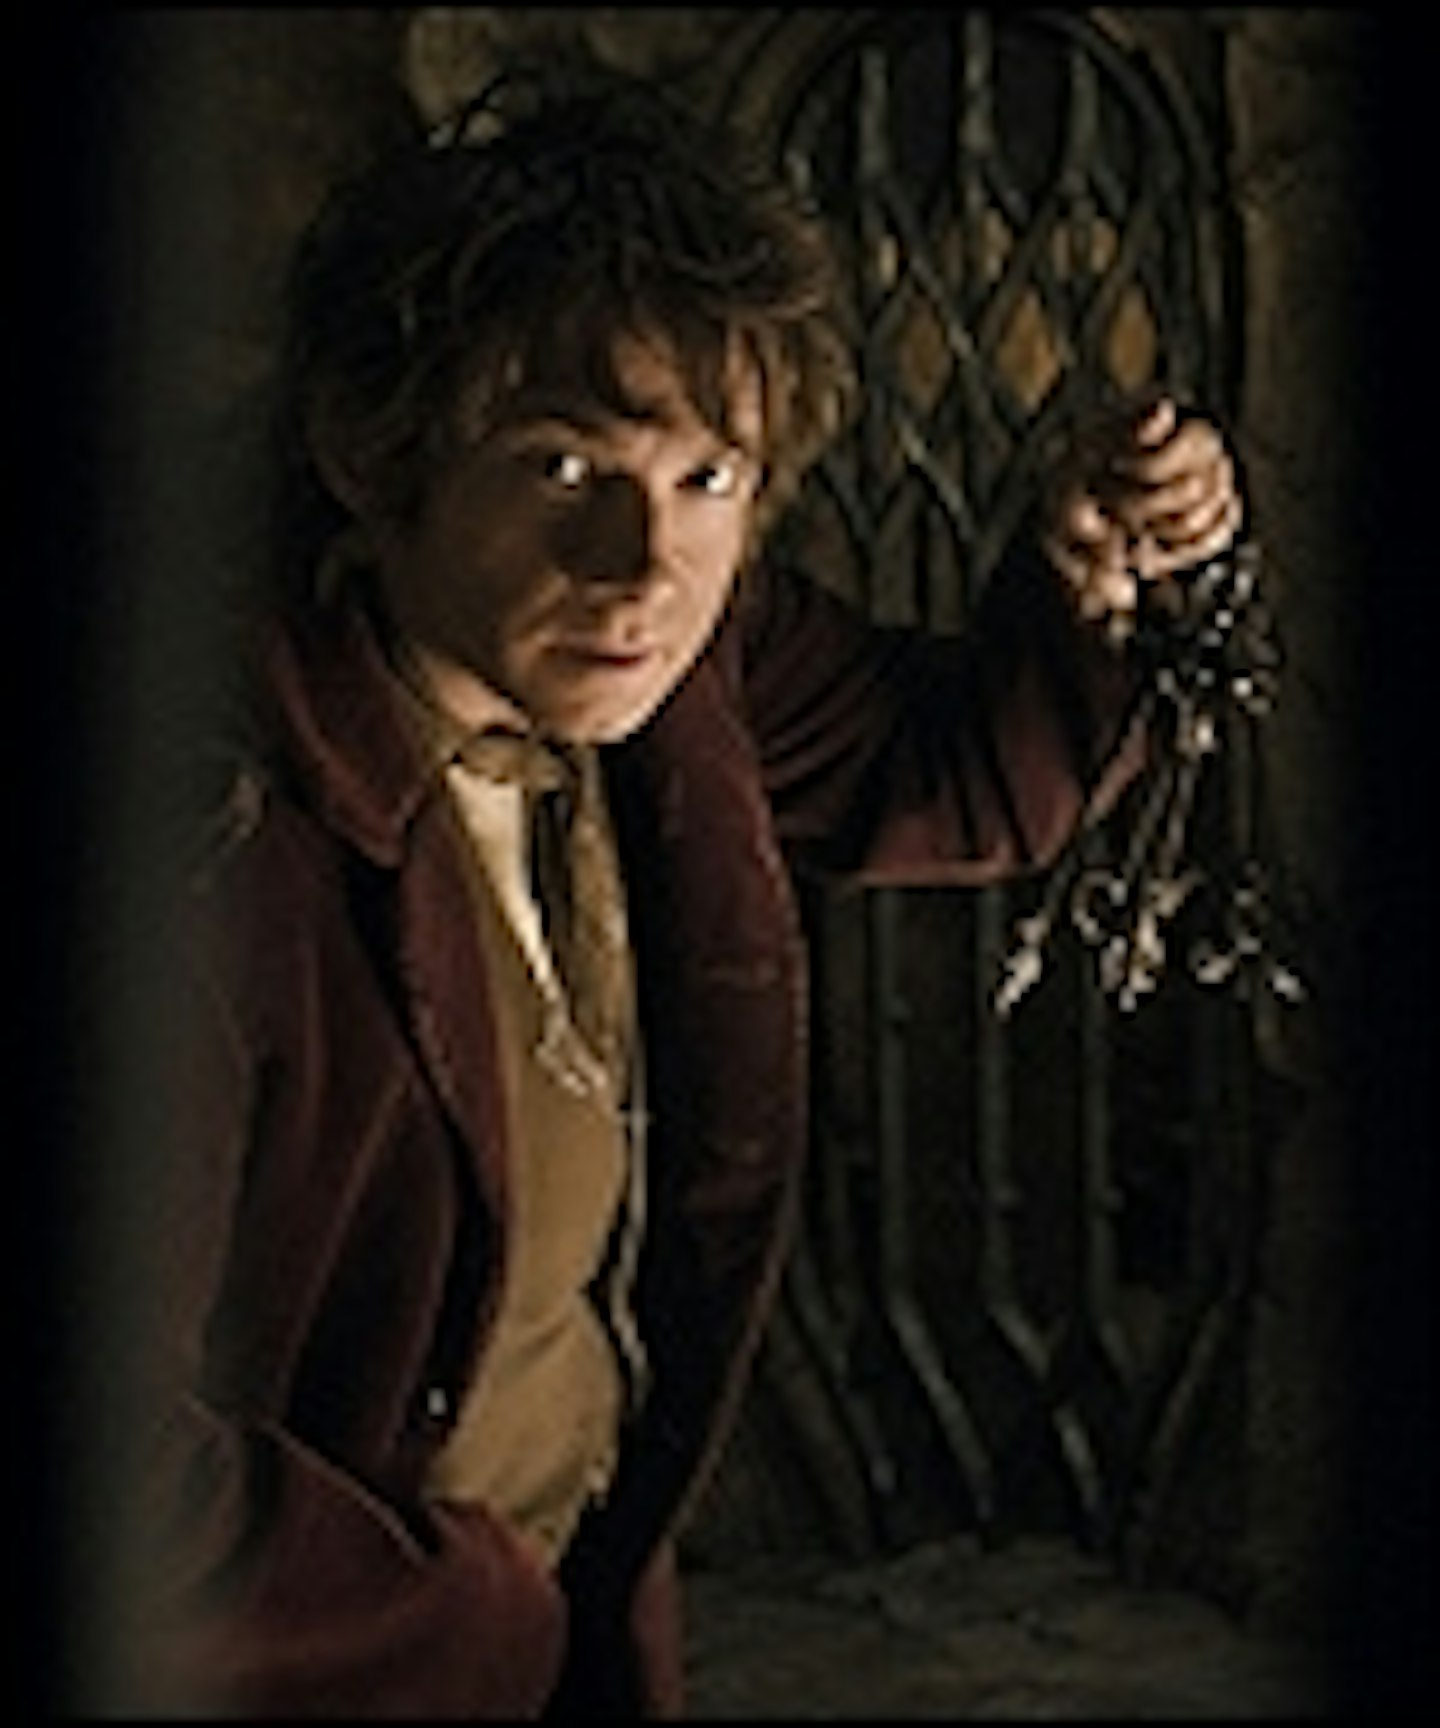 New Stills From The Hobbit: The Desolation Of Smaug